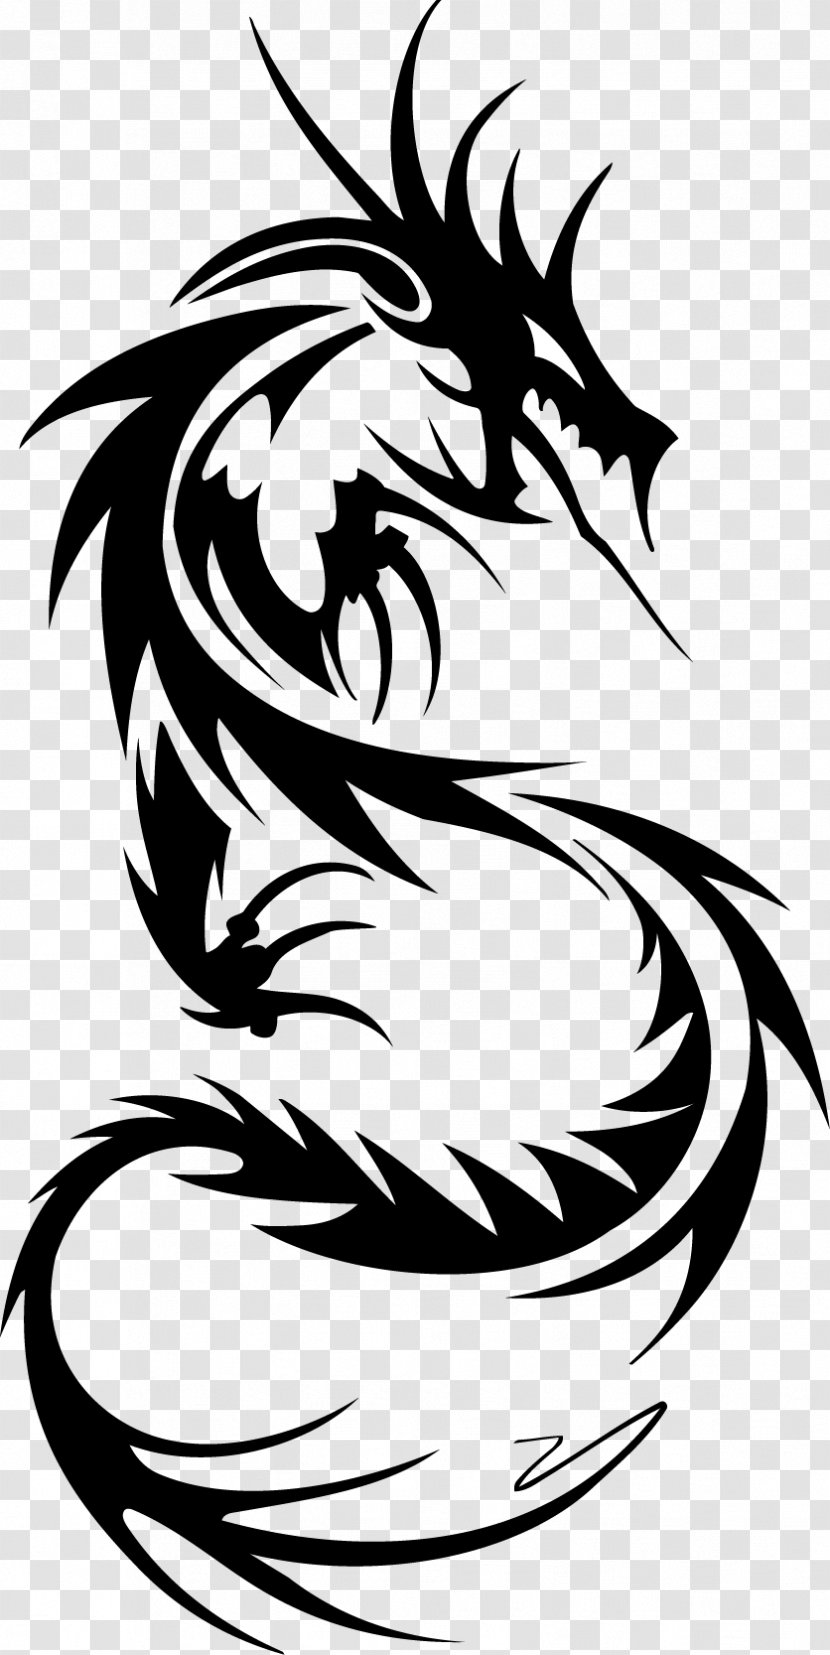 Sleeve Tattoo Tribe Nautical Star Dragon - Tail Transparent PNG